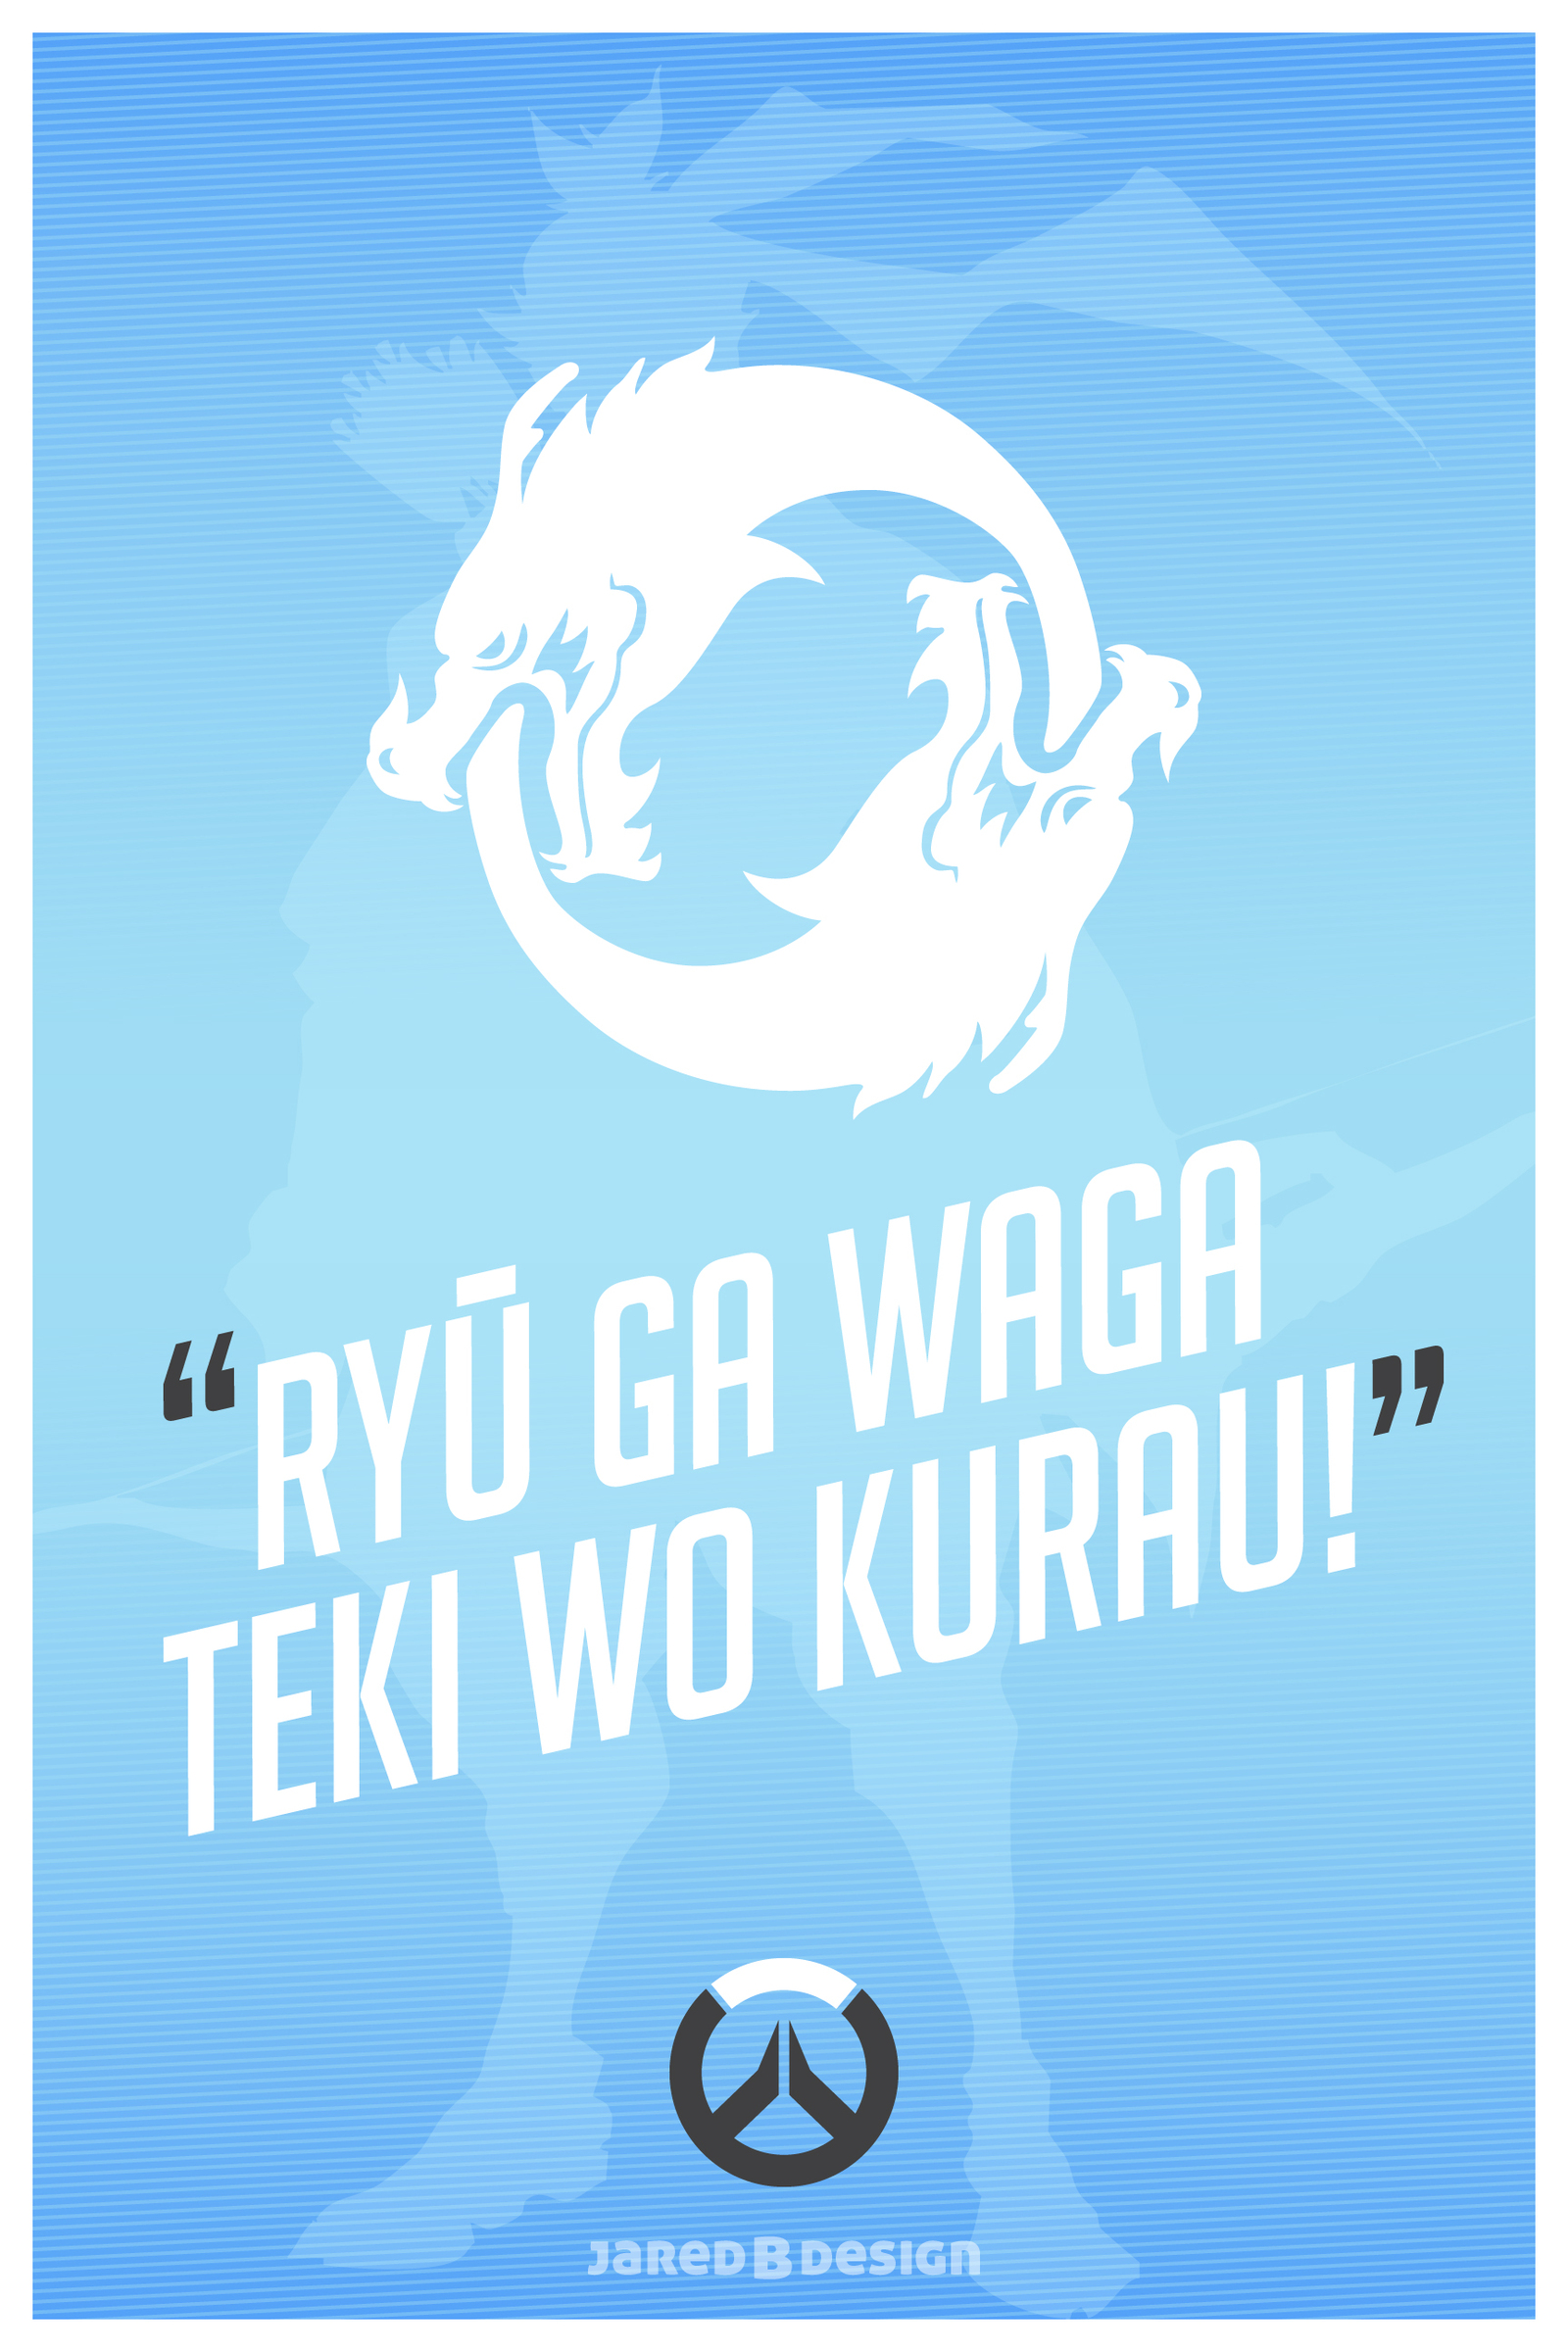 Gorgeous Overwatch posters - Overwatch, Games, Poster, Art, Graphics, Longpost